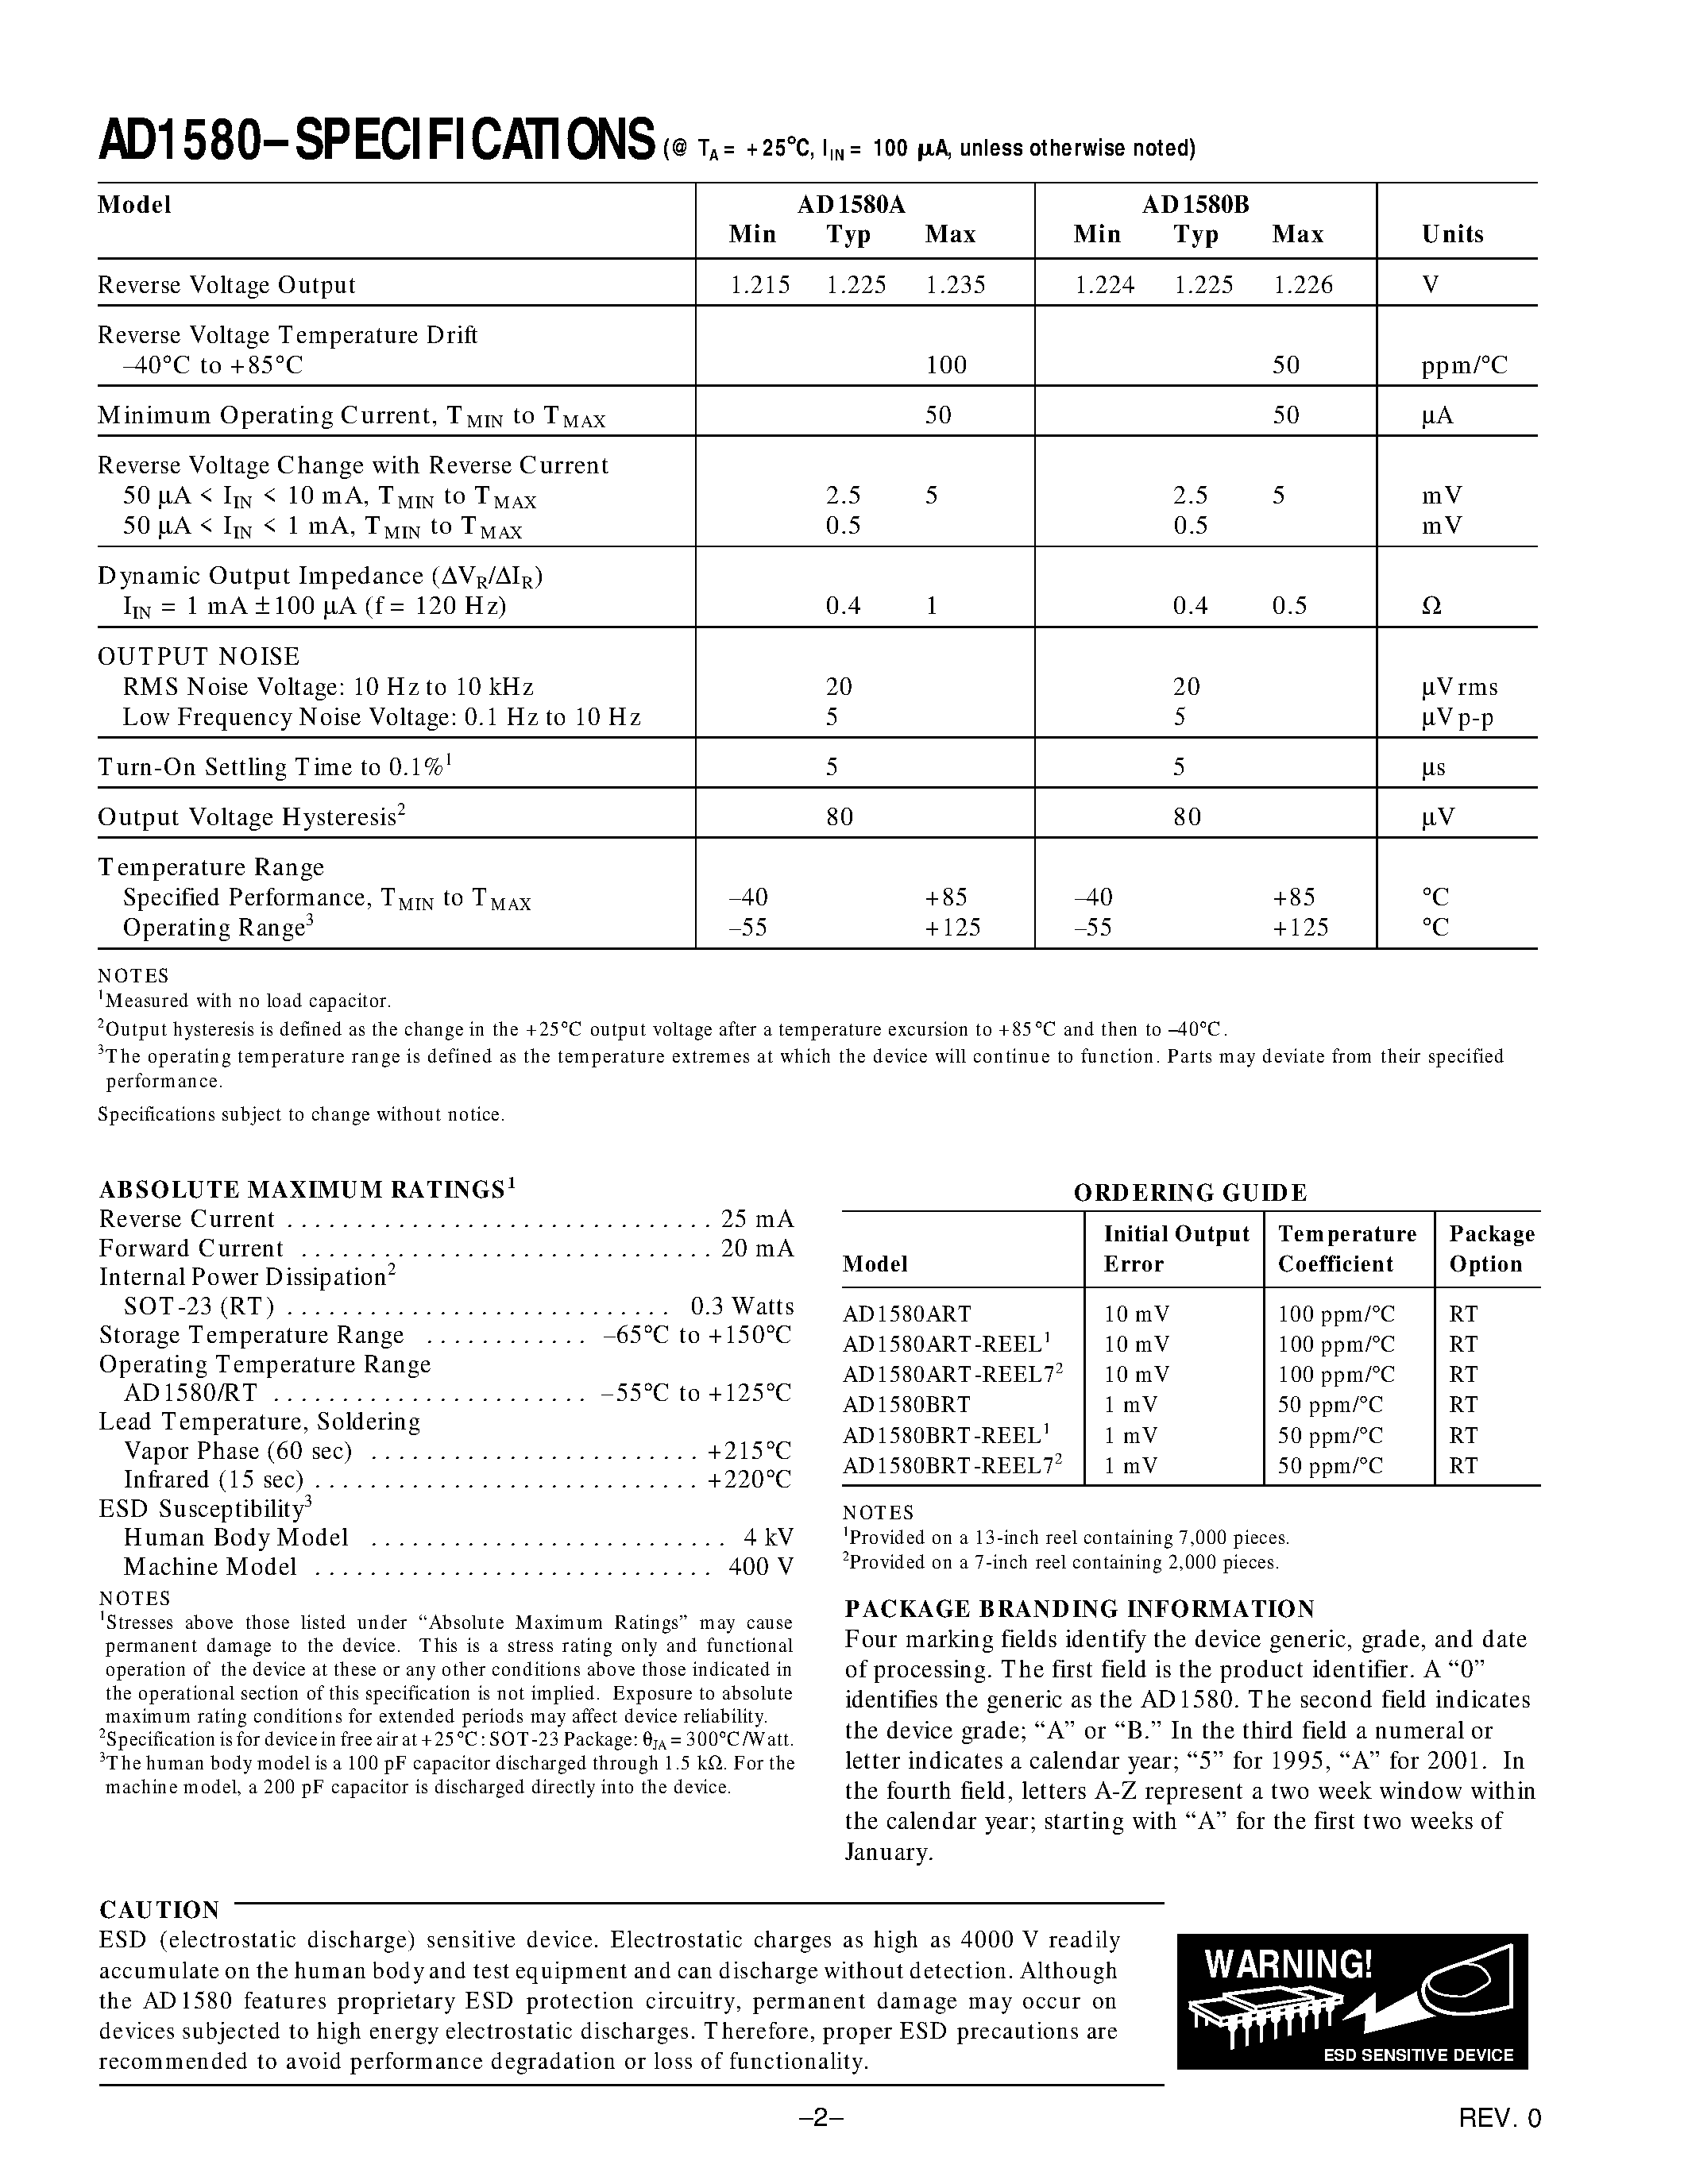 Datasheet AD1580BRT-REEL7 - 1.2 V Micropower/ Precision Shunt Voltage Reference page 2